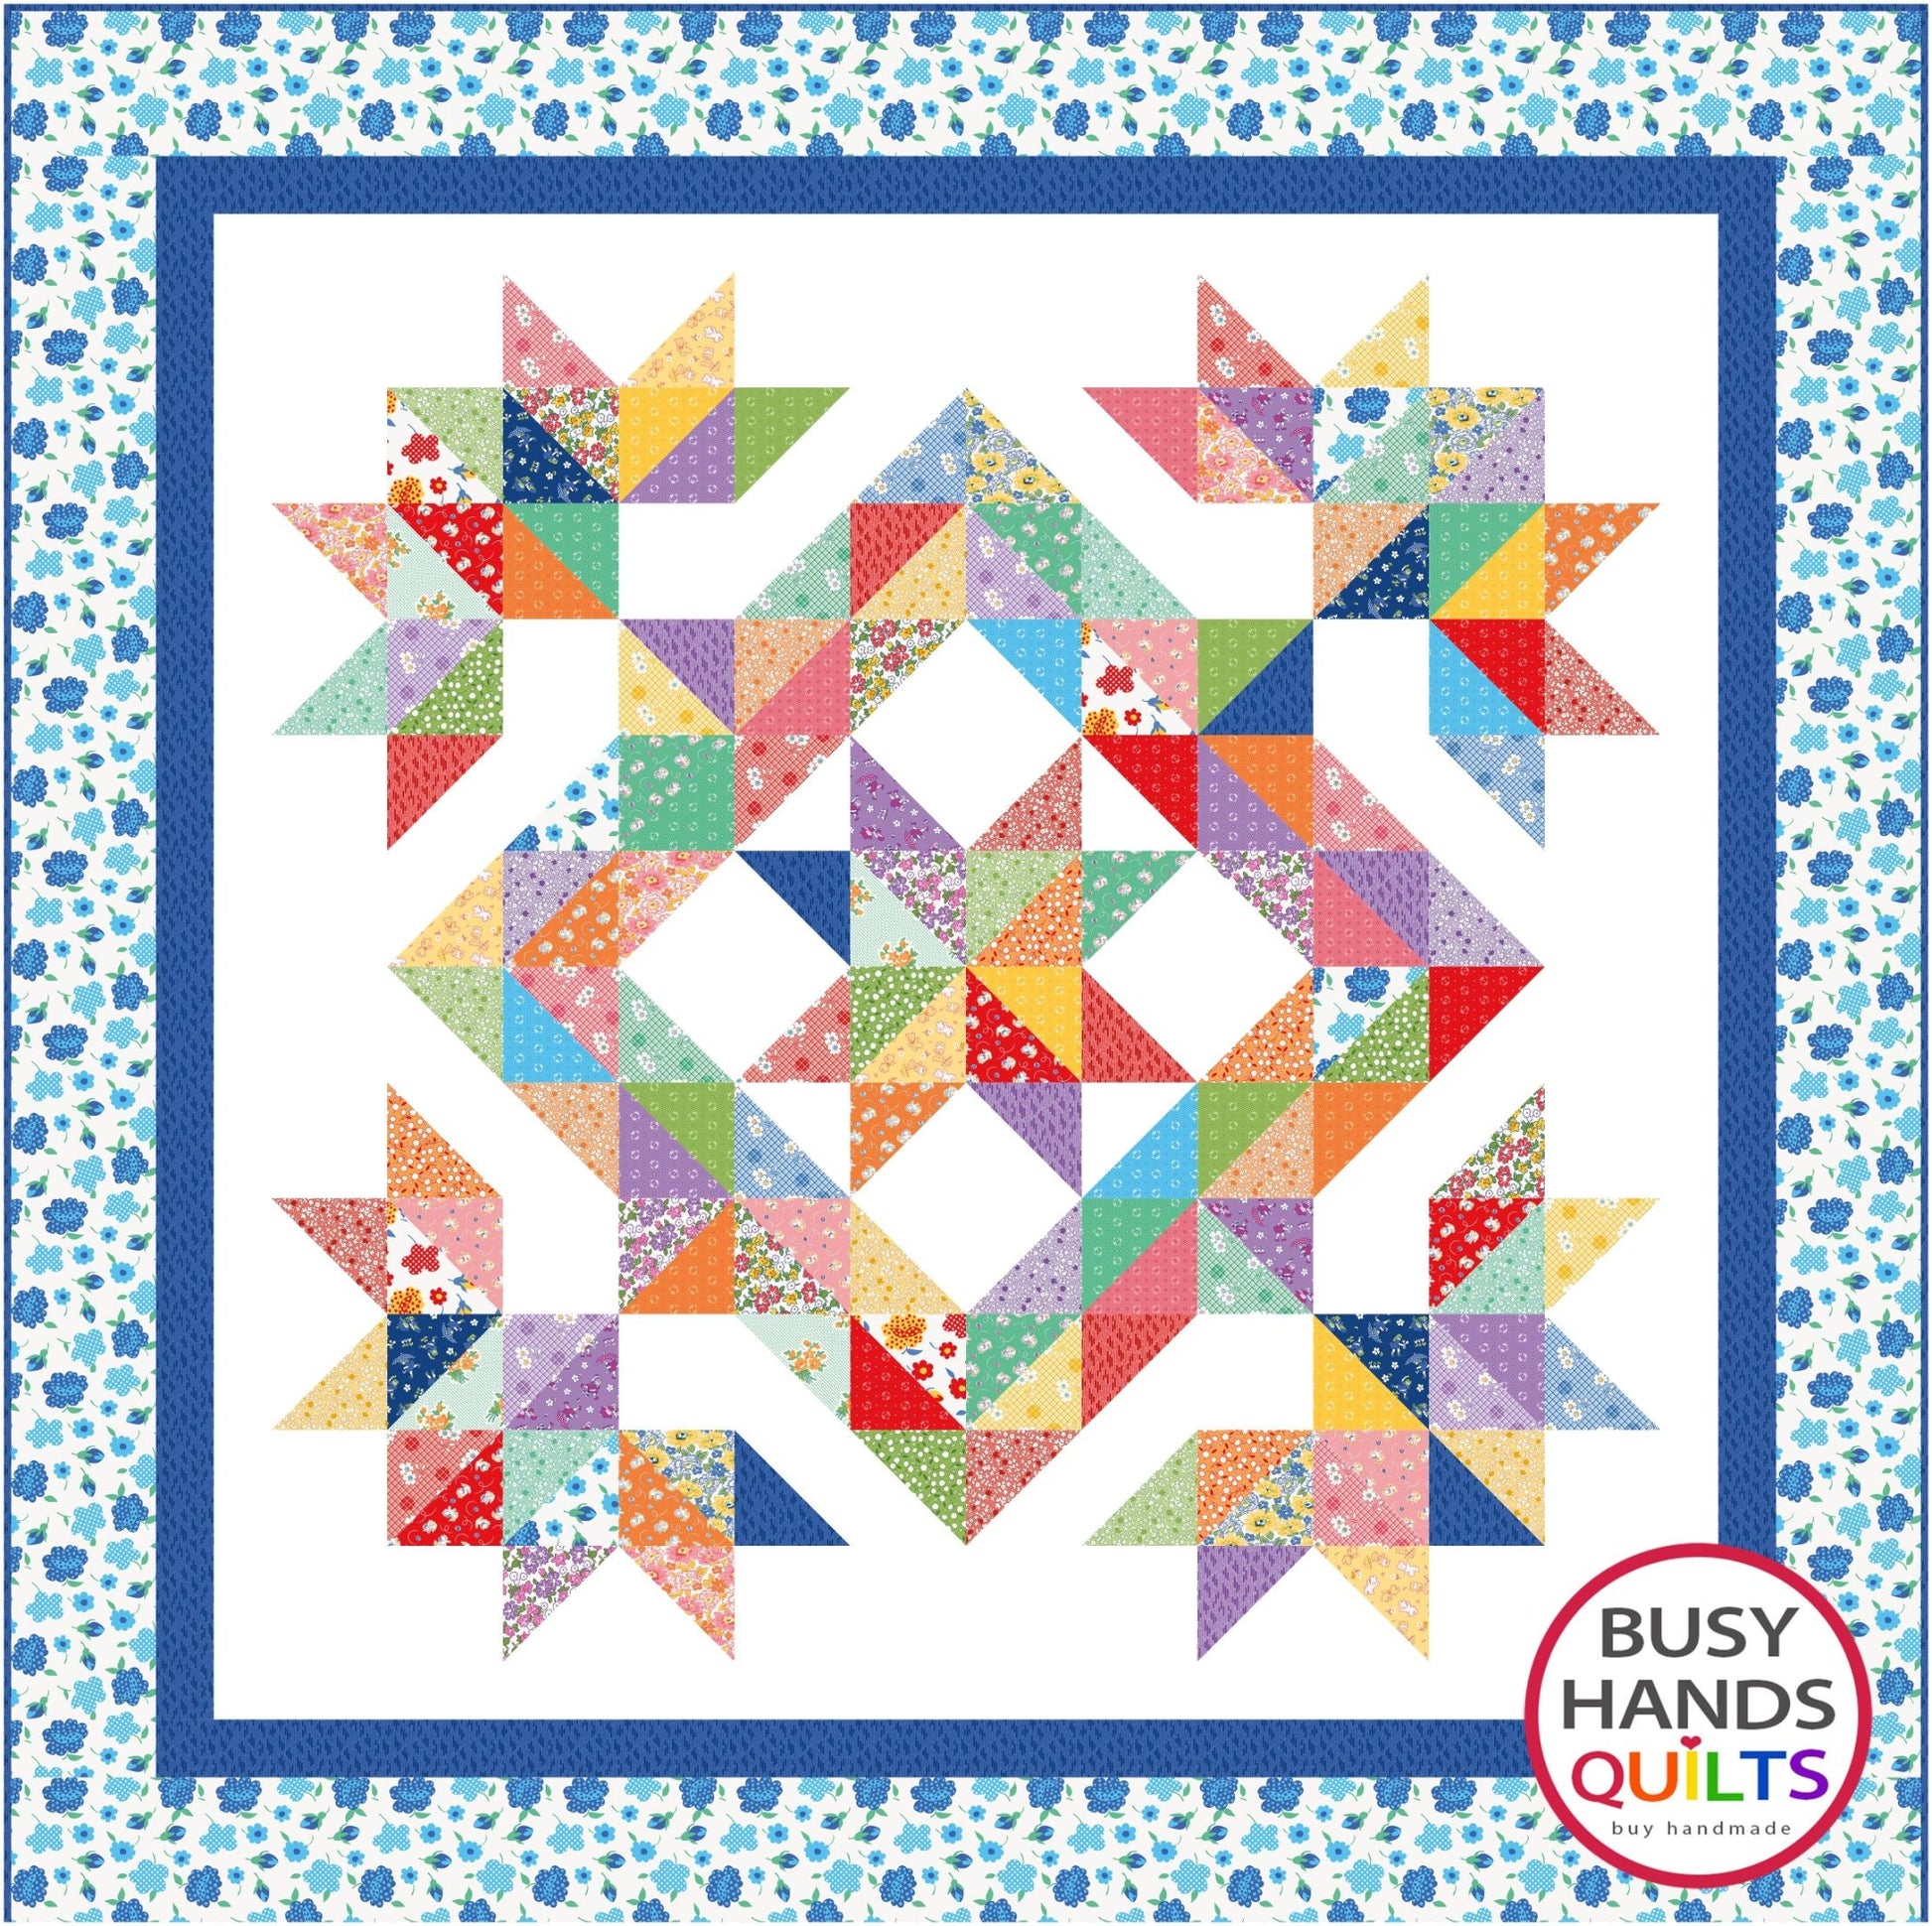 Whimsical Quilt Pattern PDF DOWNLOAD Busy Hands Quilts $12.99